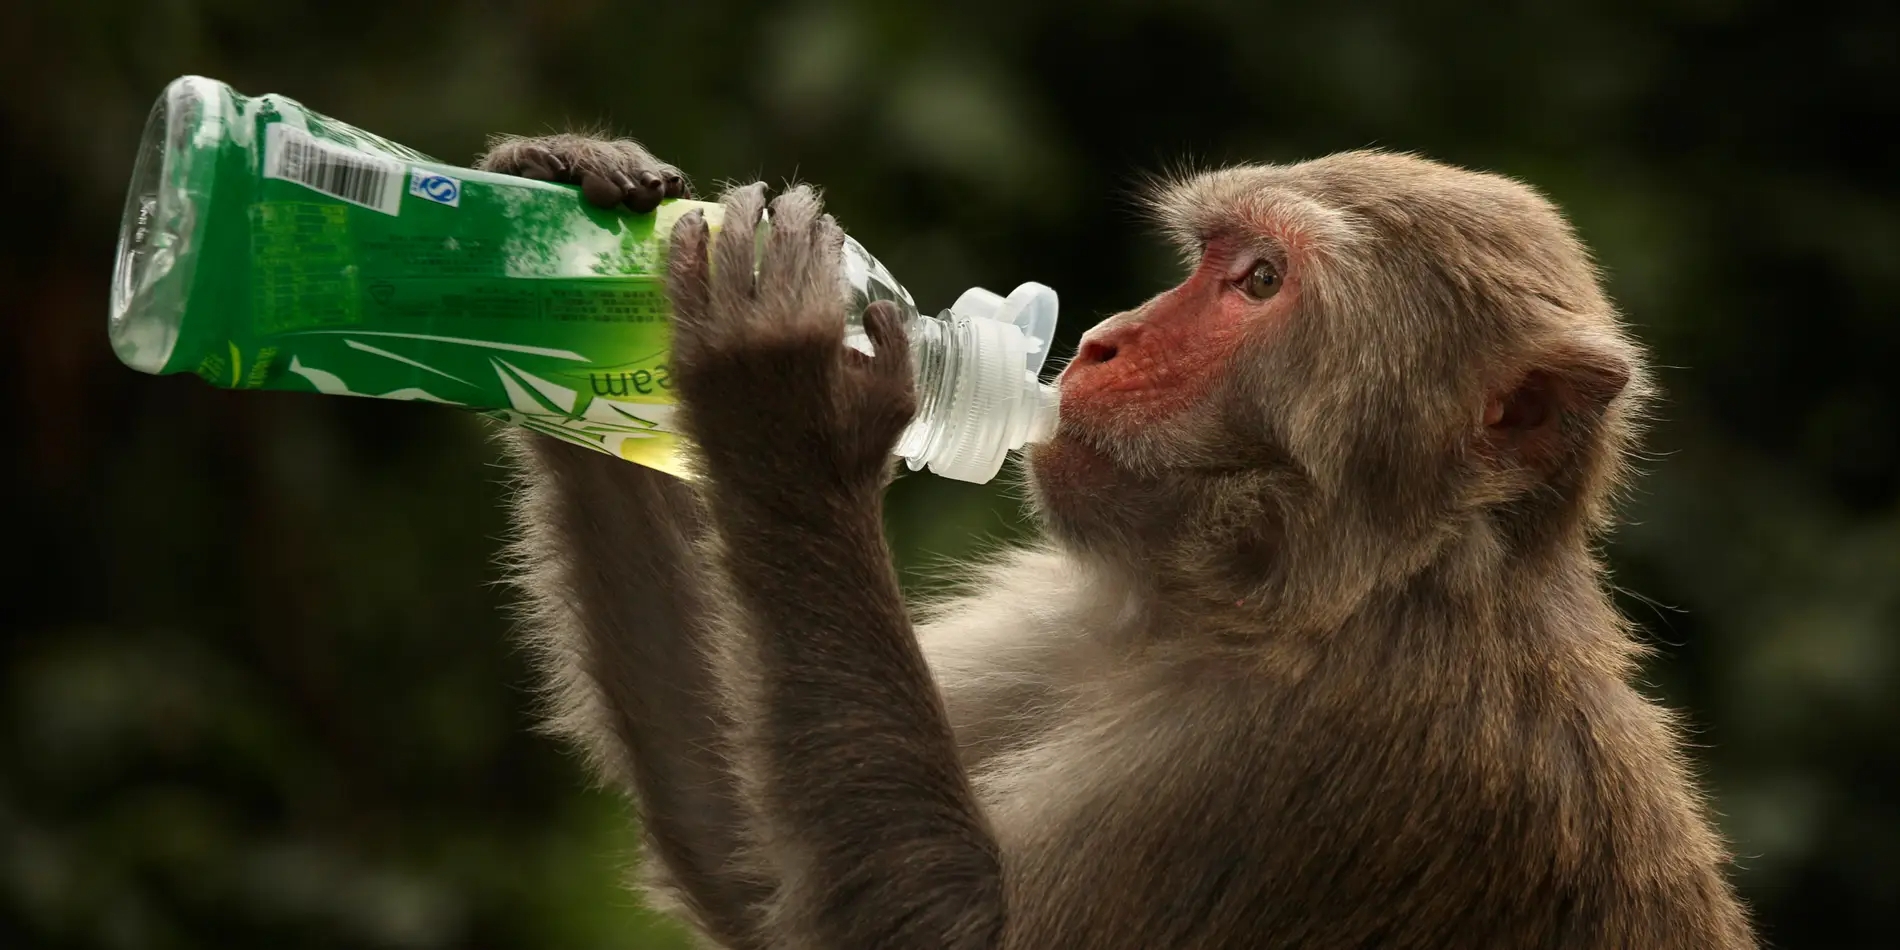 Oxford-developed vaccine appears to shield monkey from coronavirus infection